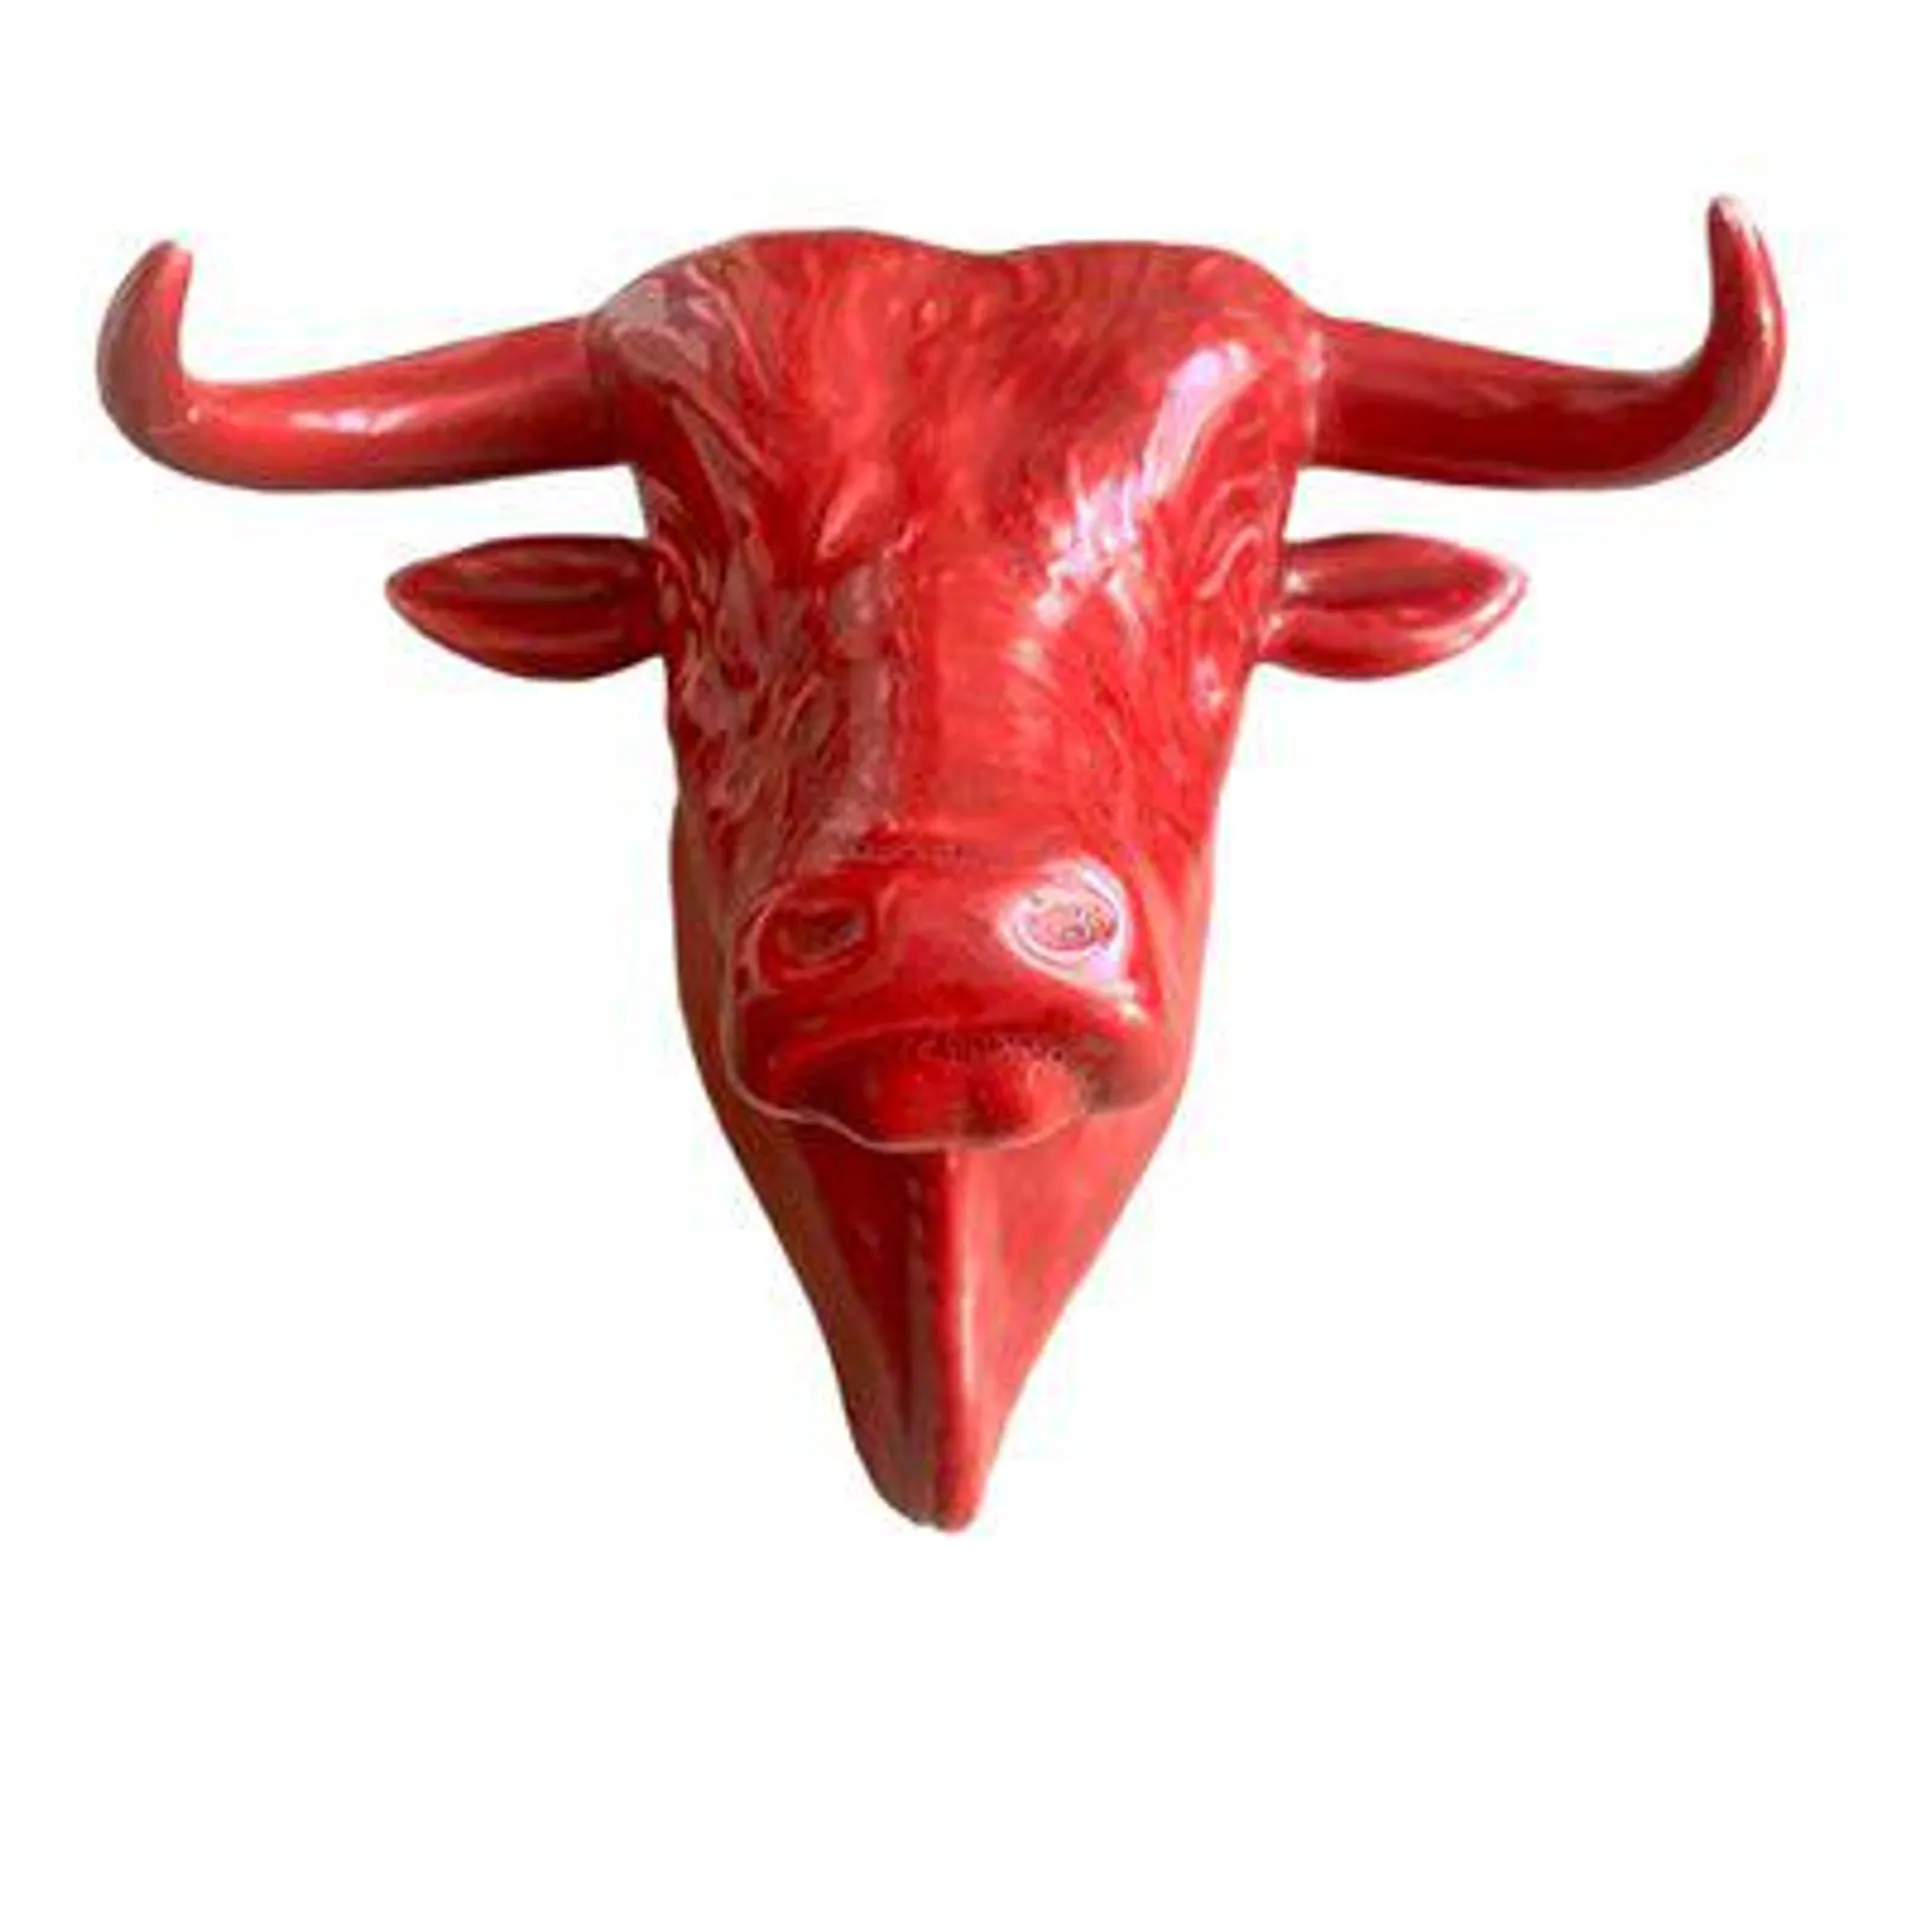 Vintage Portuguese Bull Sculpture on Ceramic Painted in Red from Campo Santa Clara